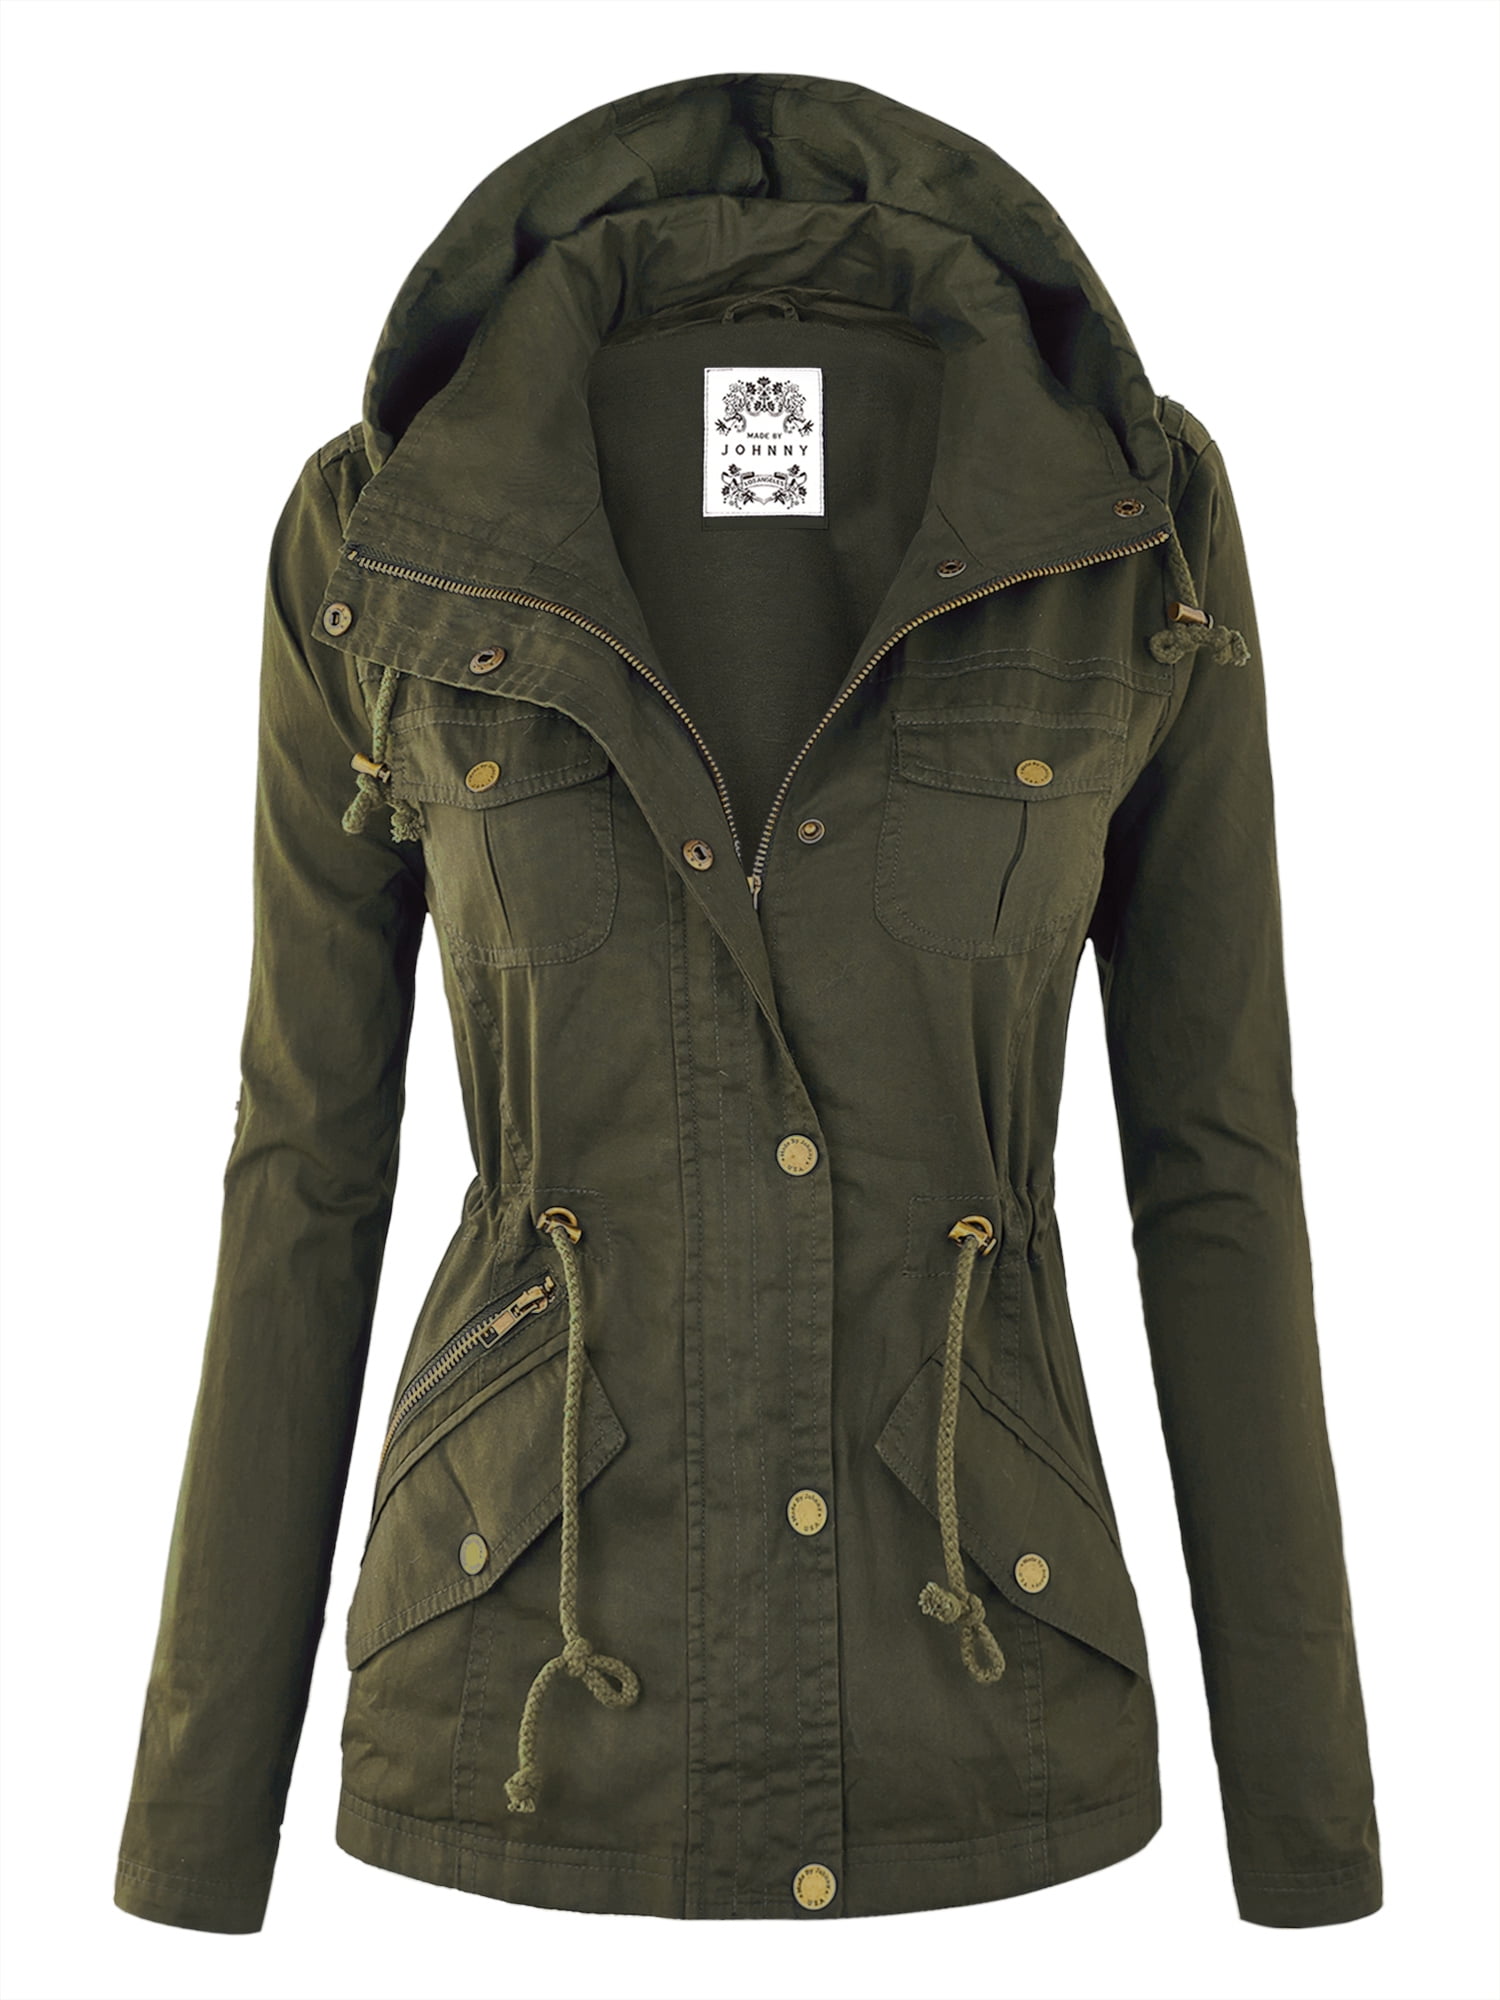 Made by Johnny Women's Pop of Color Anorak Parka Jacket L OLIVE ...